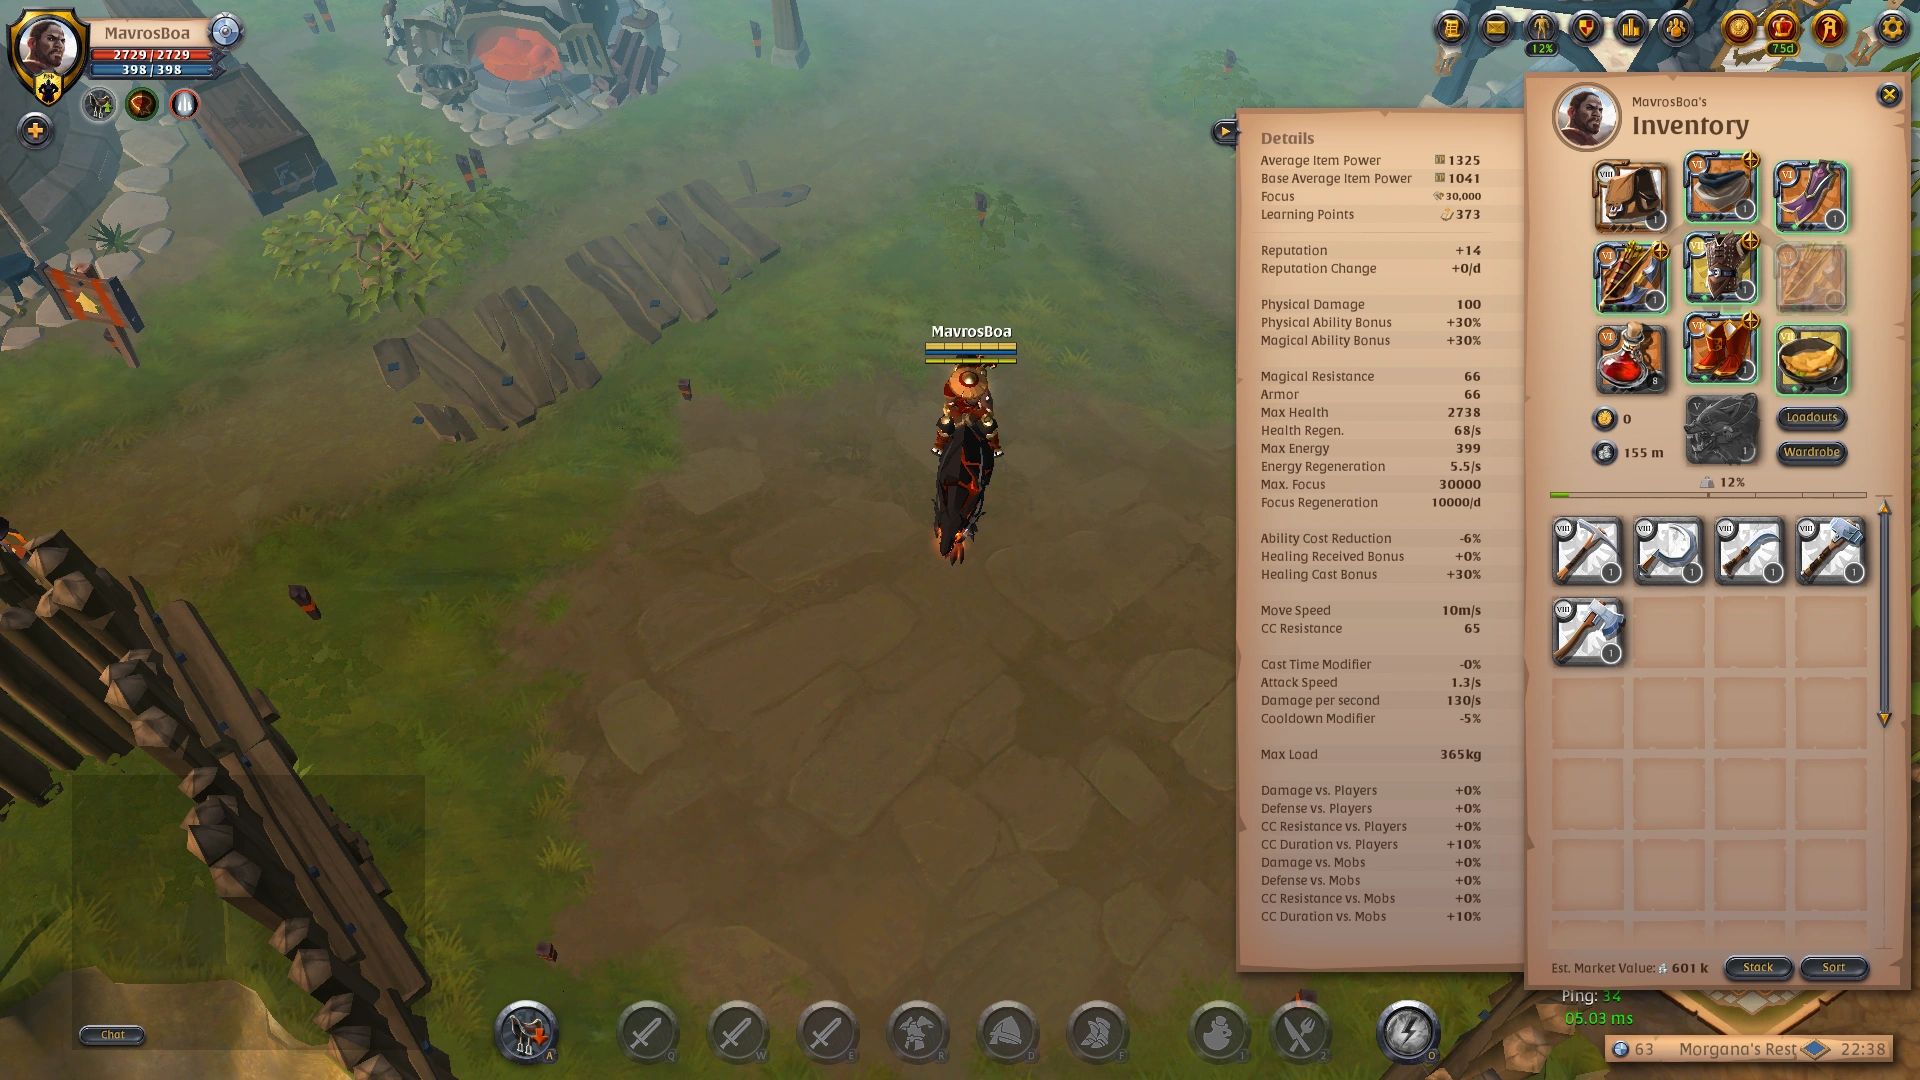 Top 3 Best Solo Player Builds  Albion Online Solo Weapons (PVP/PVE) 